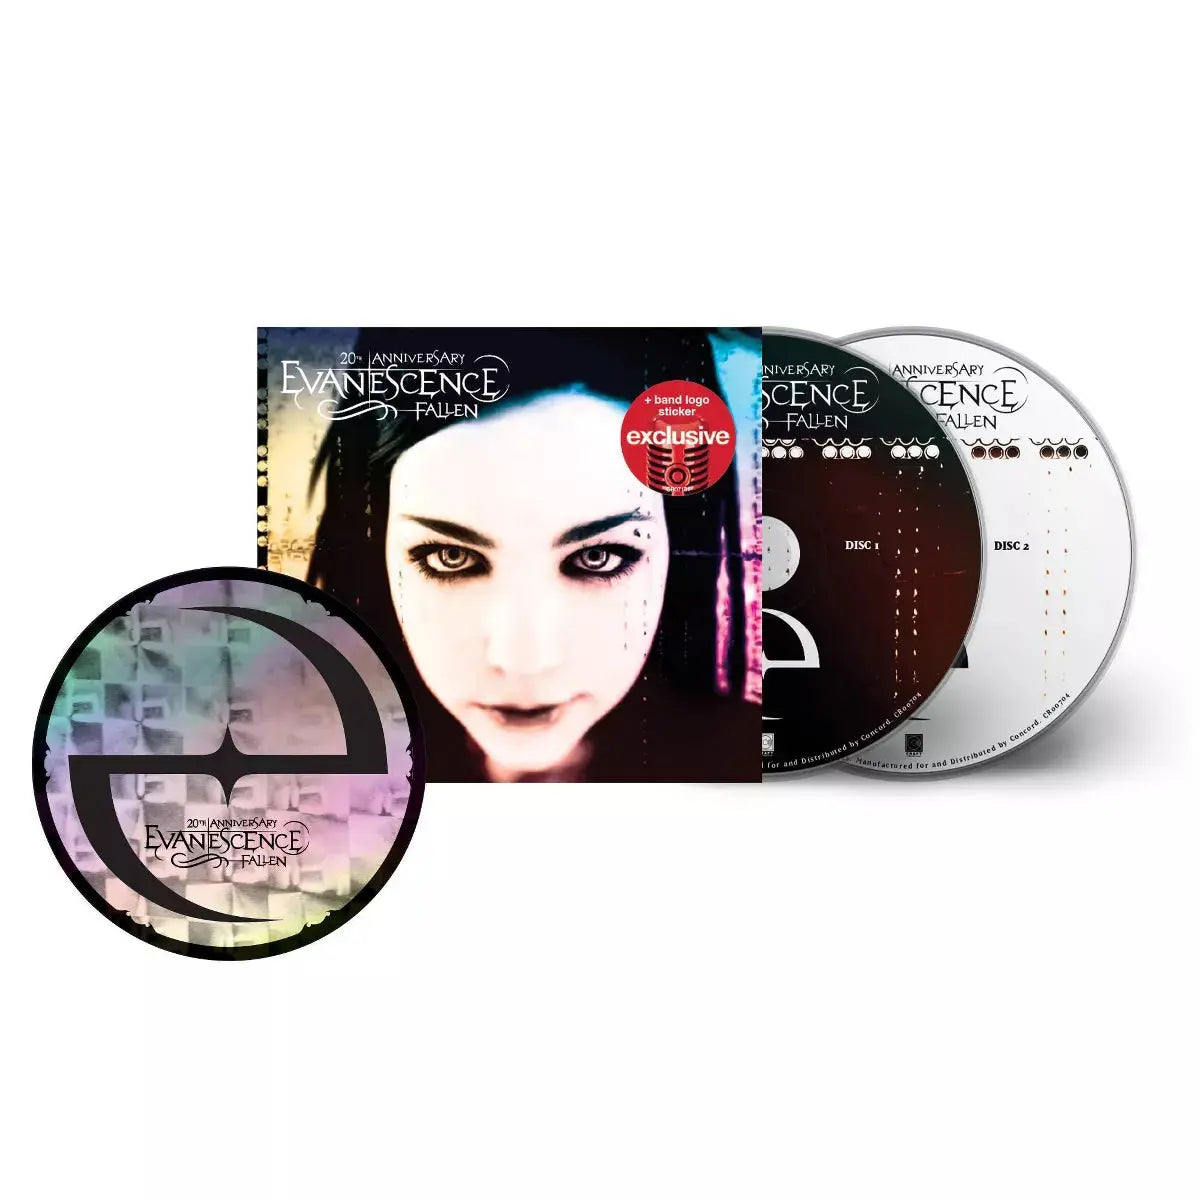 Evanescence - Fallen (20th Anniversary) [Deluxe CD with Exclusive Sticker]